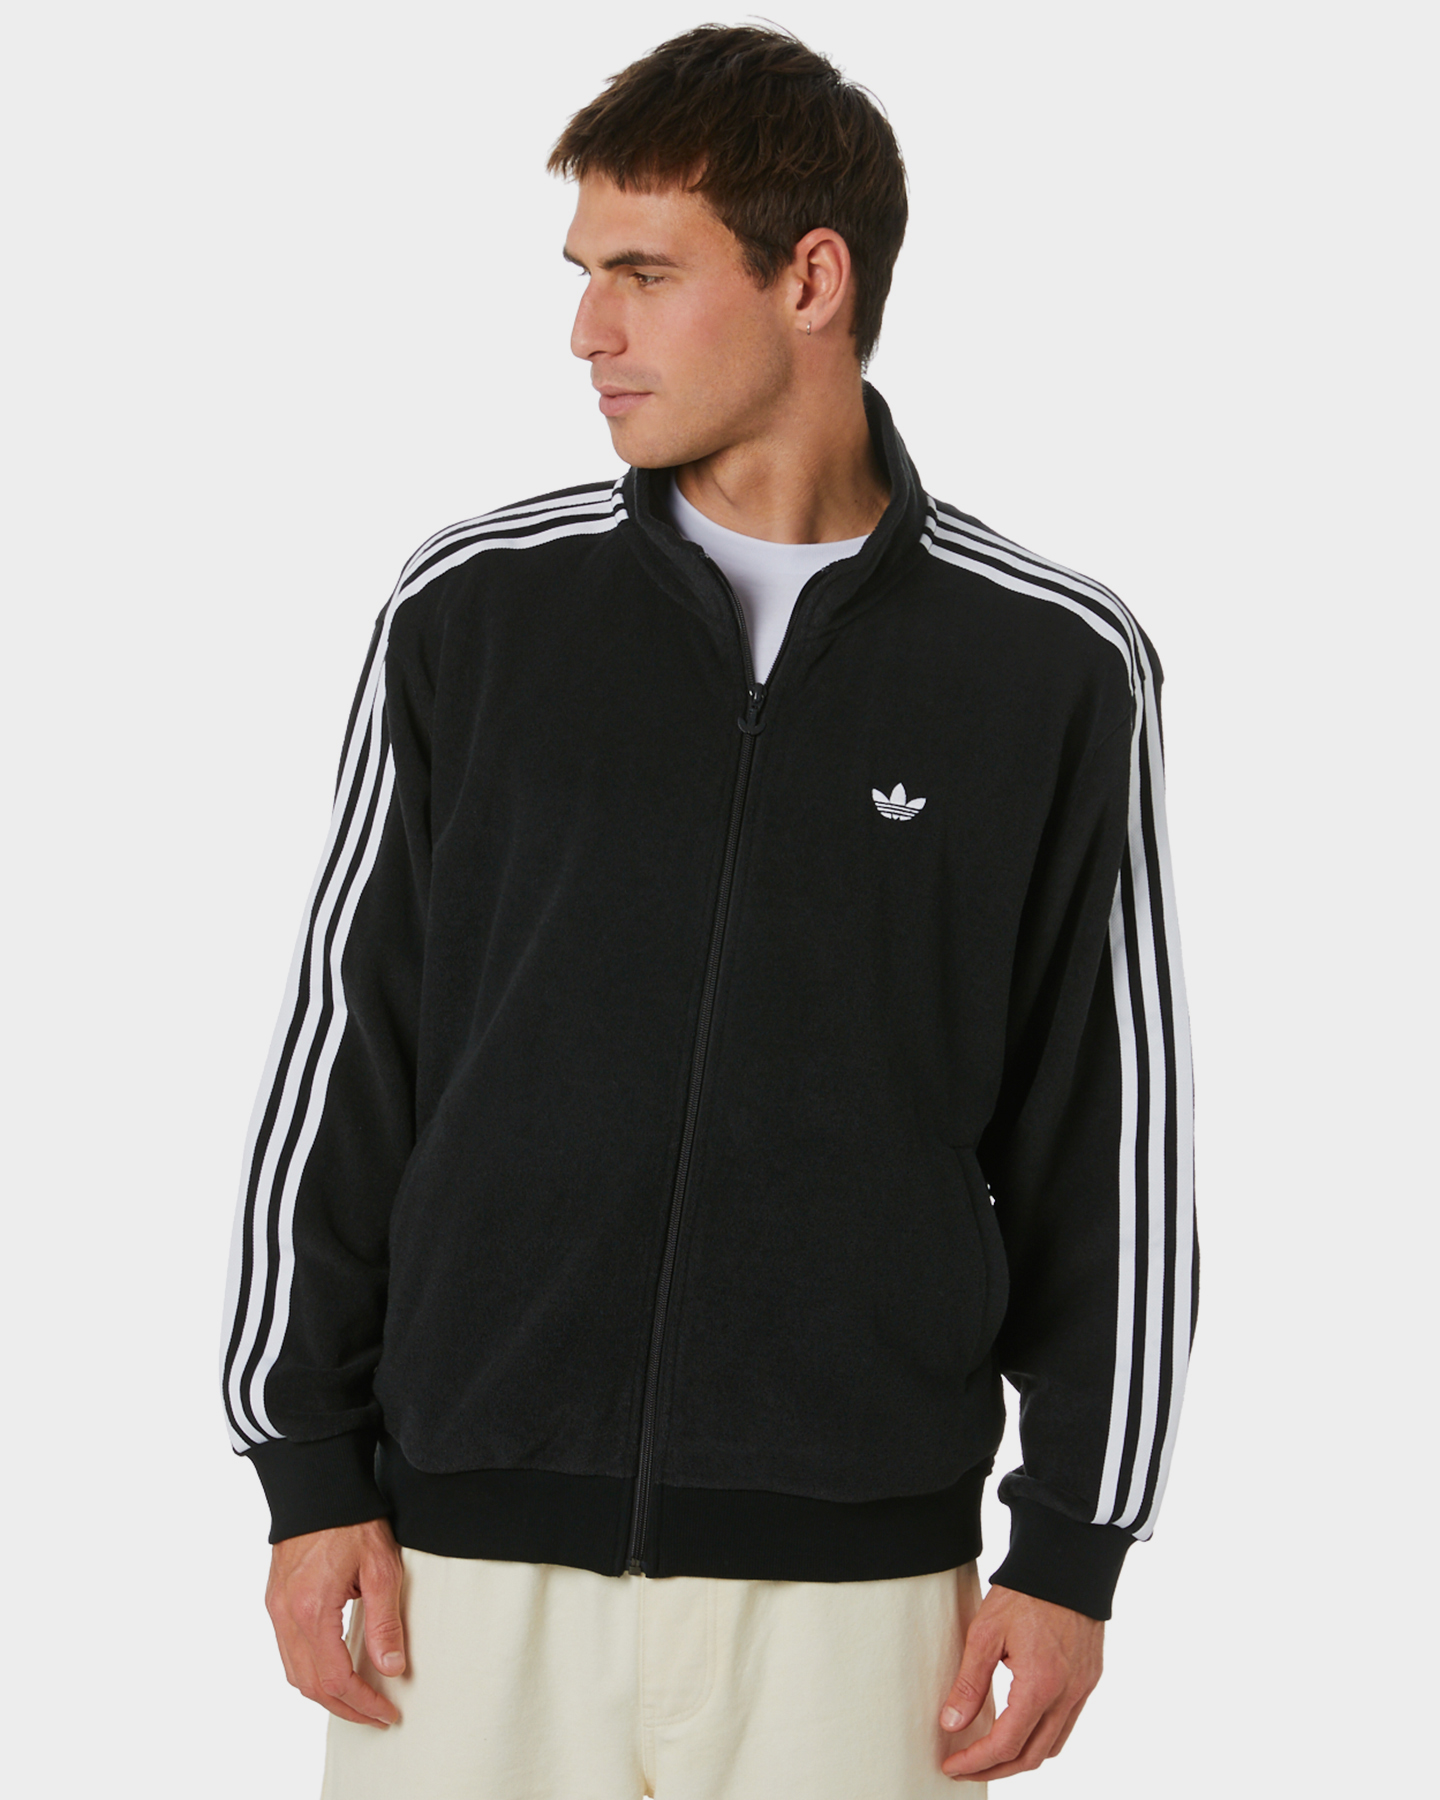 adidas jacket picture